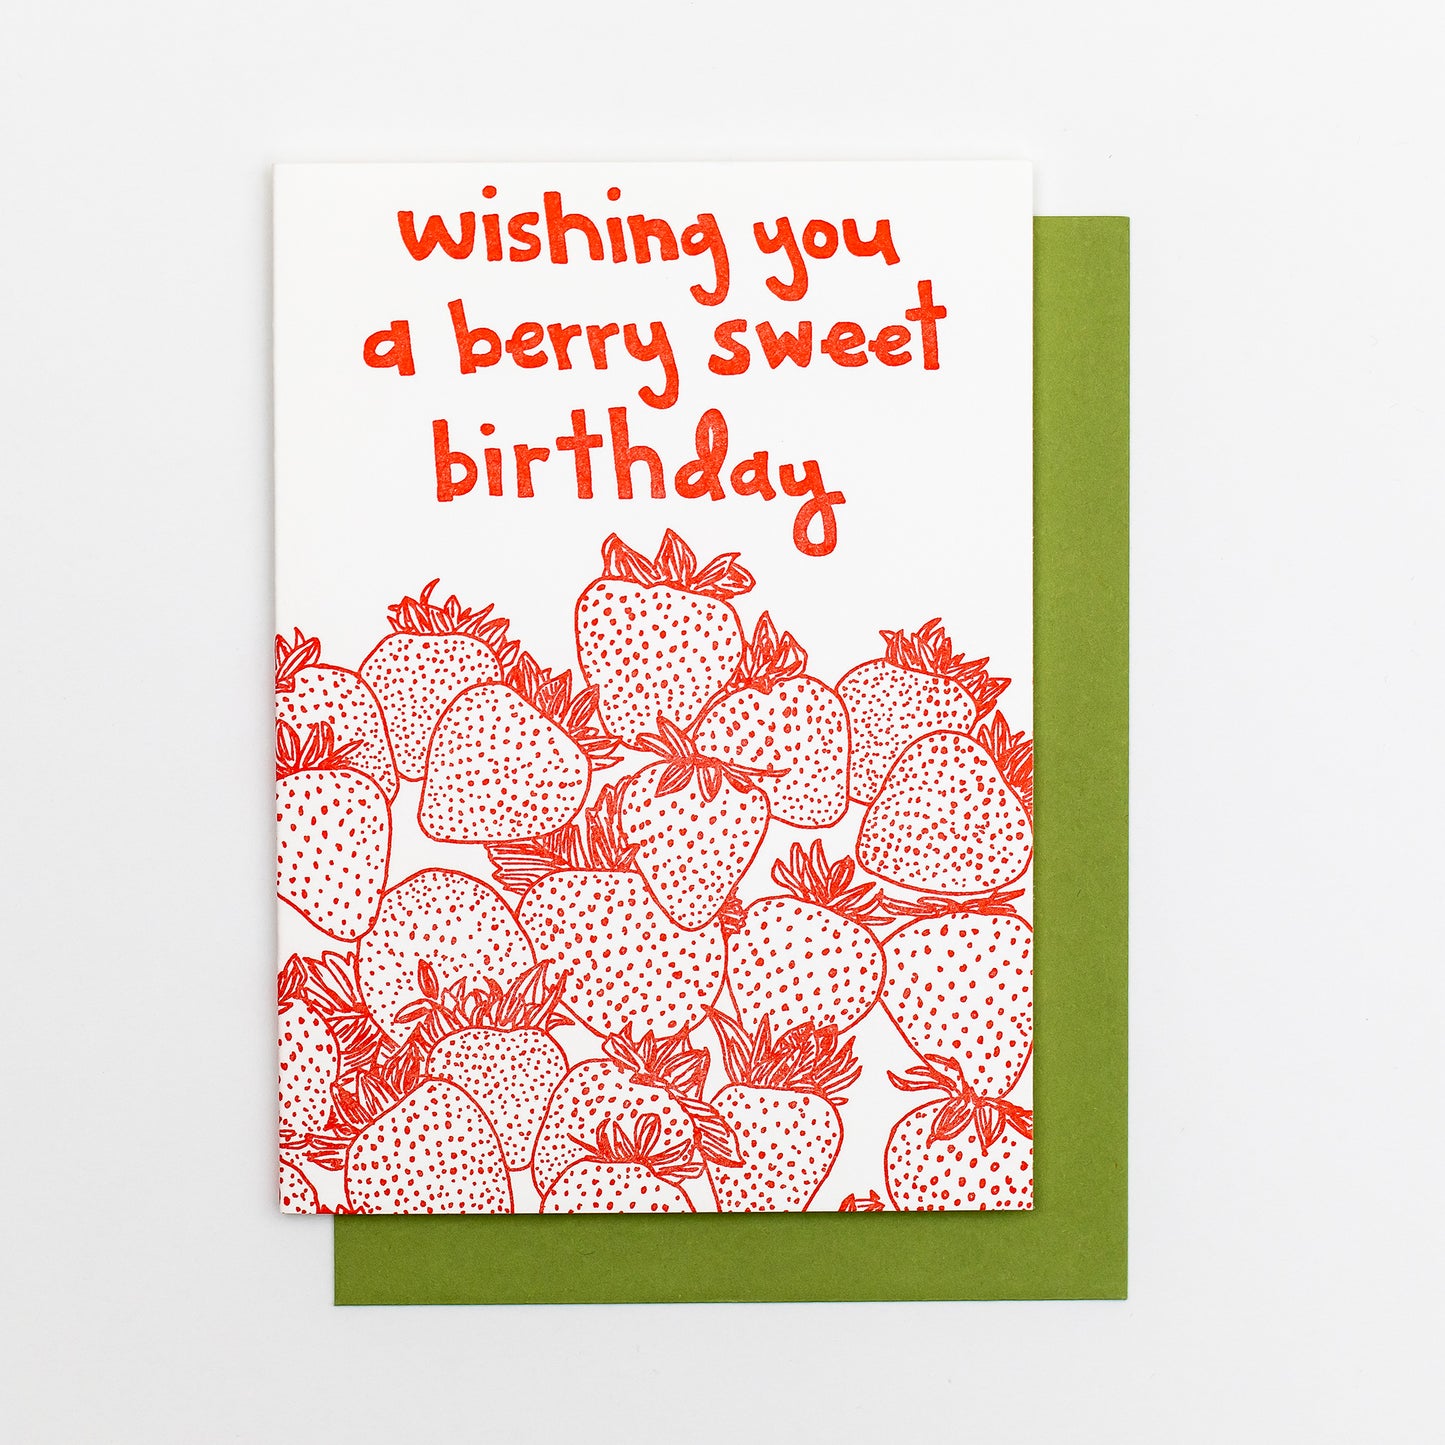 Letterpress greeting card featuring hand-drawn strawberries printed in a vibrant red ink. "Wishing you a Berry Sweet Birthday!" is written at the top of the card in a whimsical hand-drawn text, printed in the same red ink. The card is white, blank inside, and is paired with a deep green envelope.